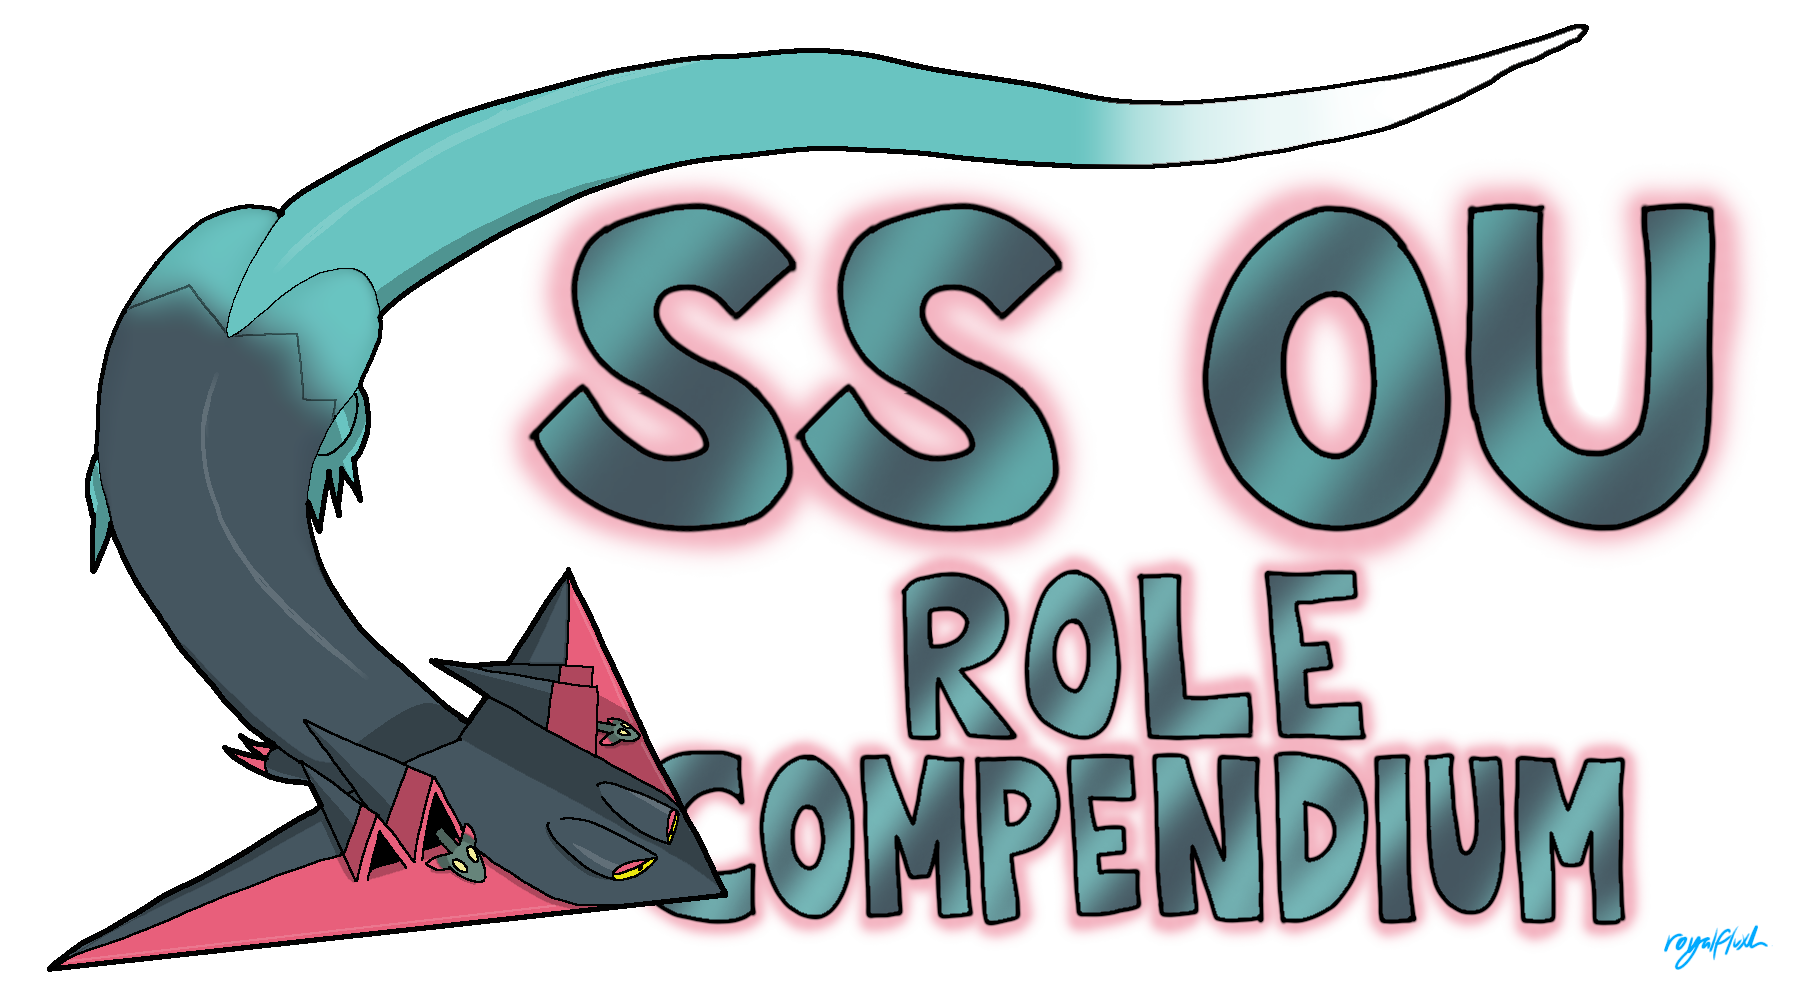 SSOU banners_role compendium.png